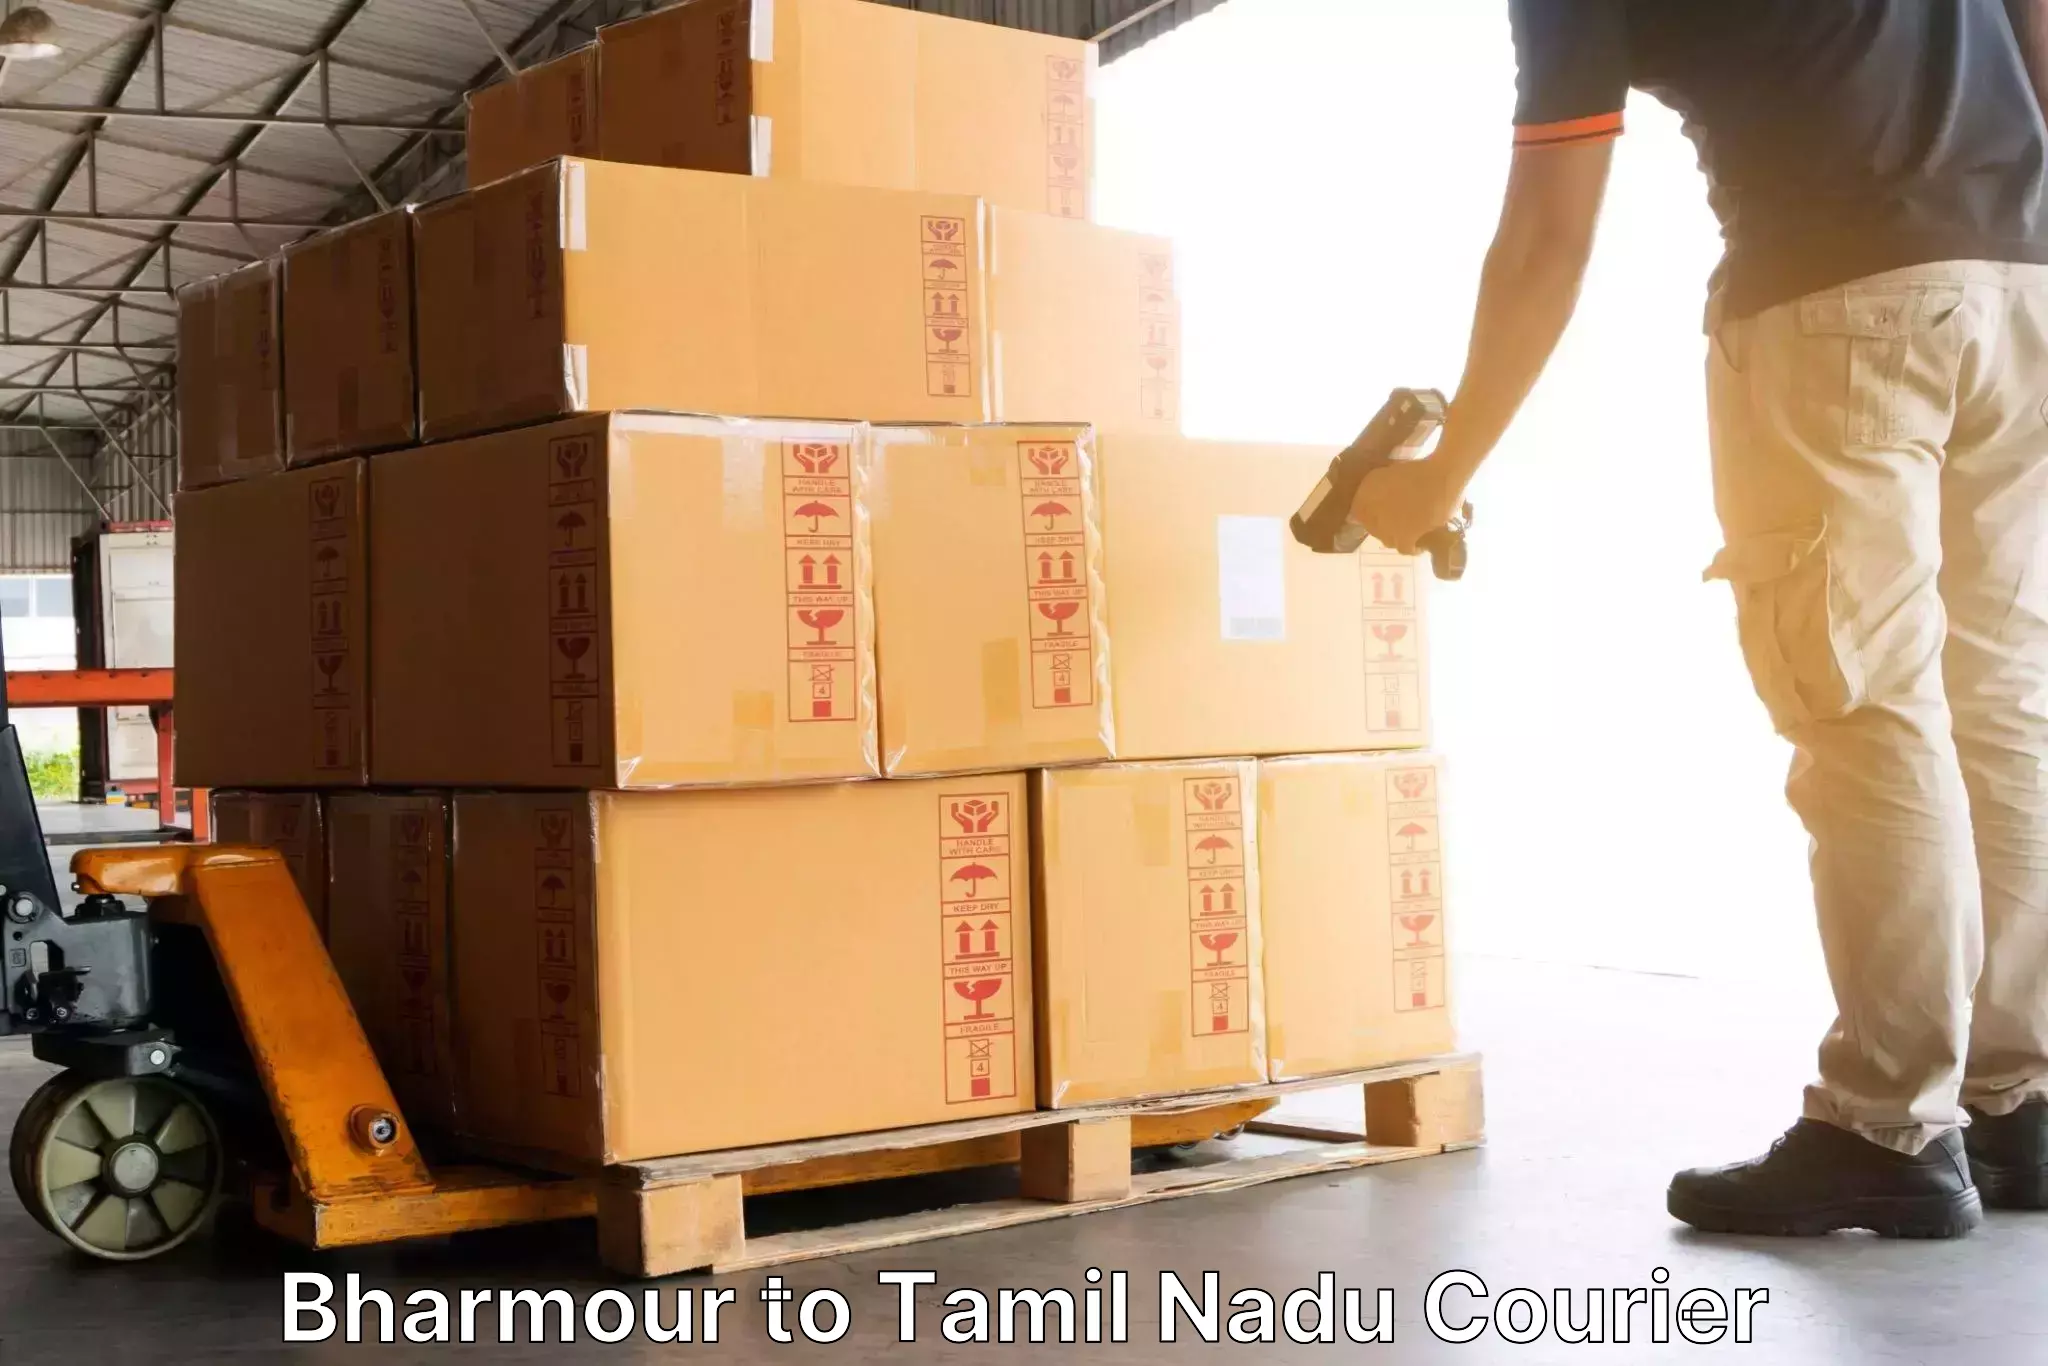 Nationwide parcel services Bharmour to Melur